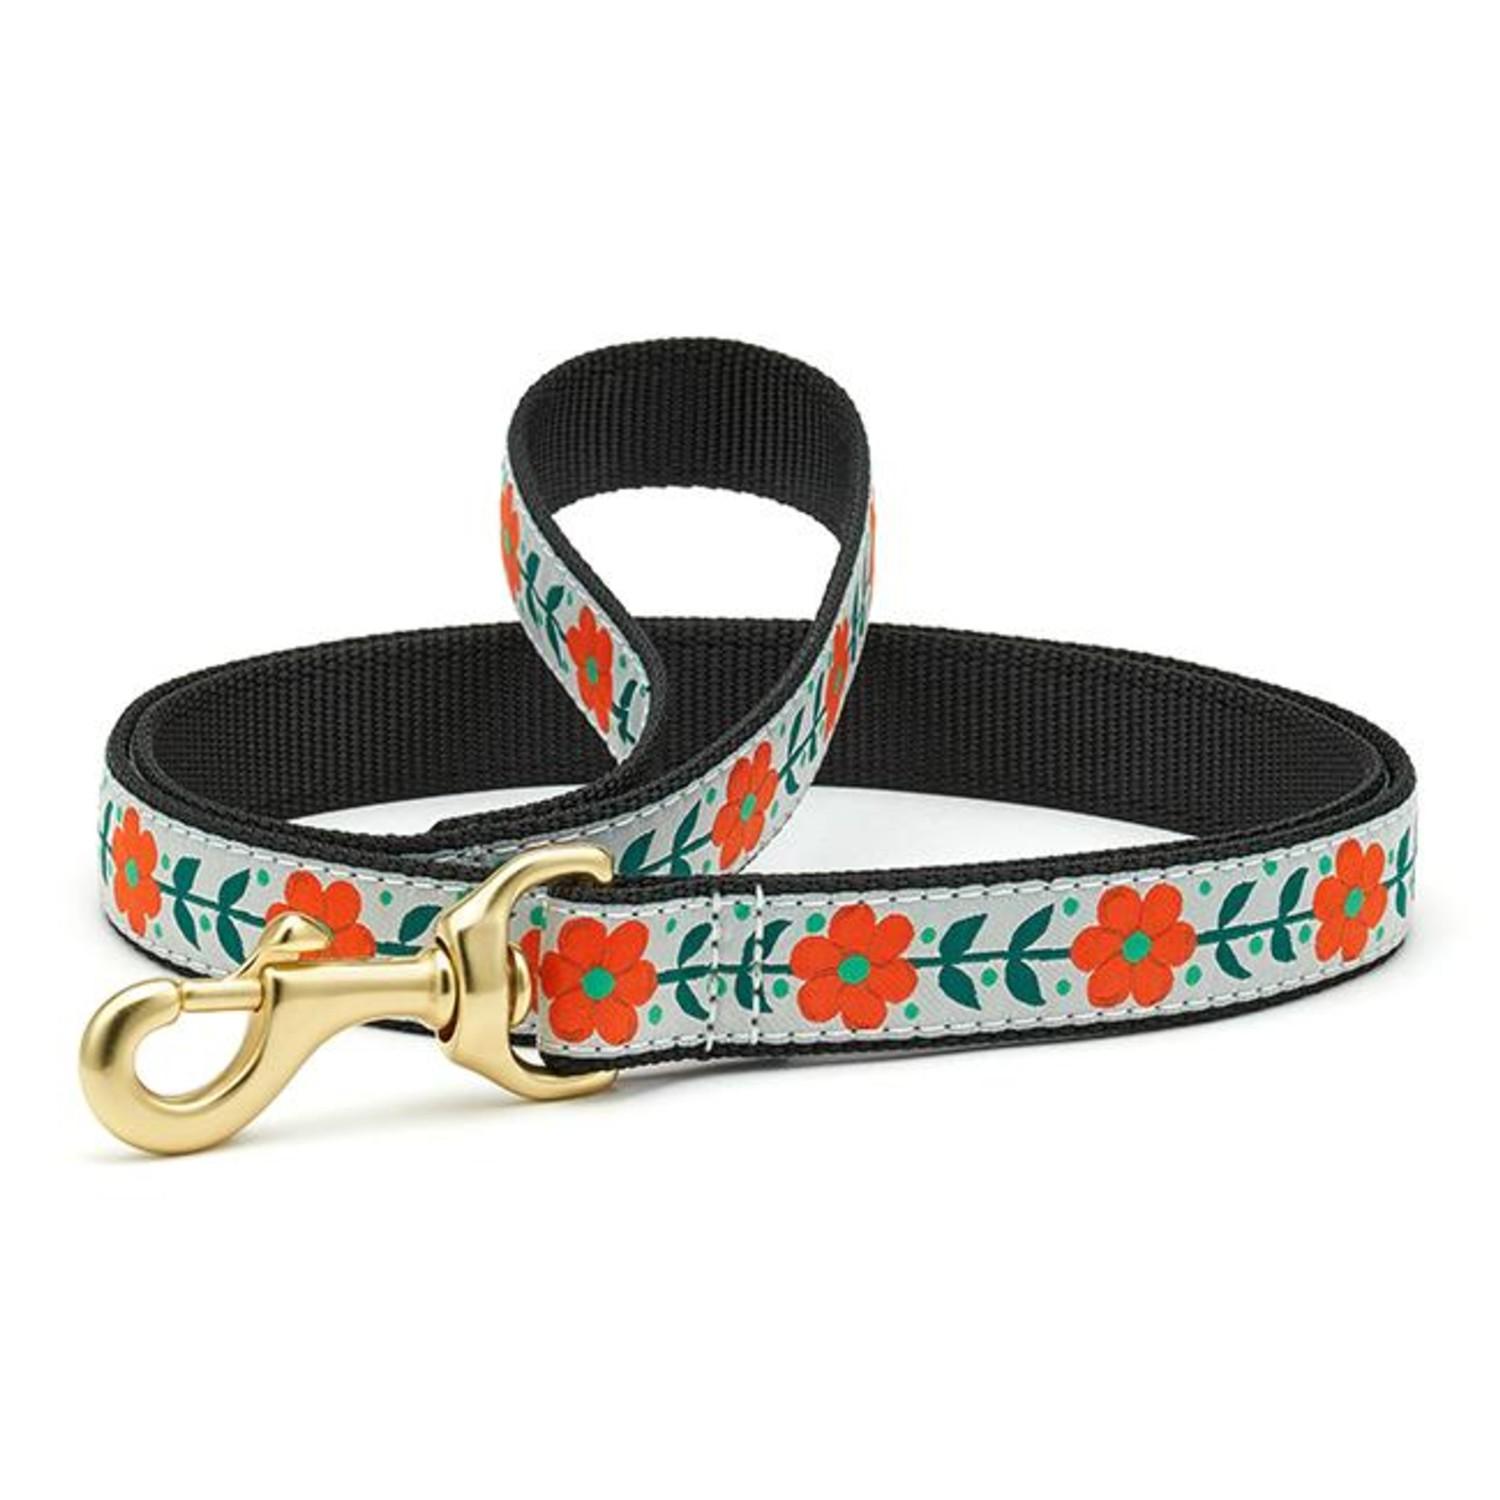 Orange You Pretty Dog Leash by Up Country